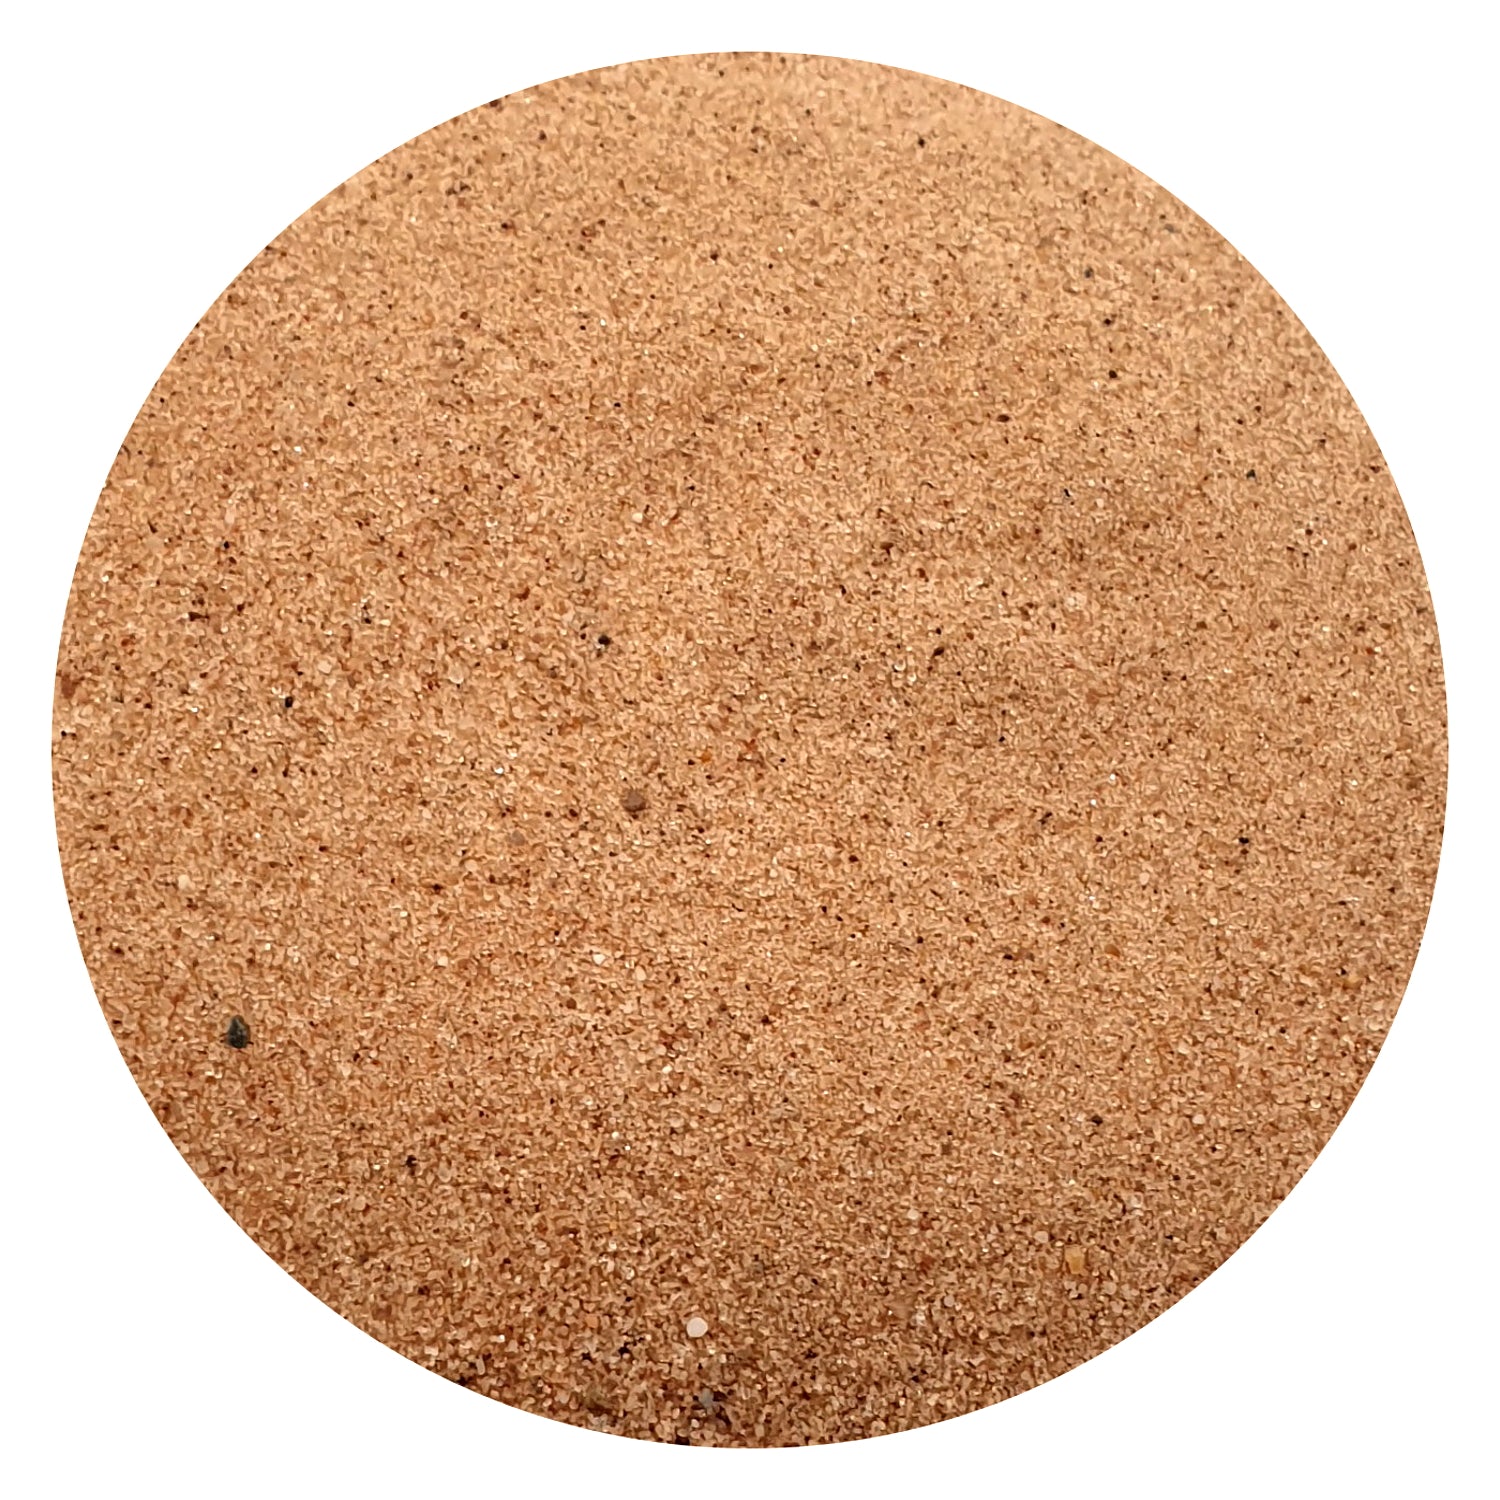 This sand is ideal for rituals, burning of loose incense or wherever you need to burn a charcoal disc.